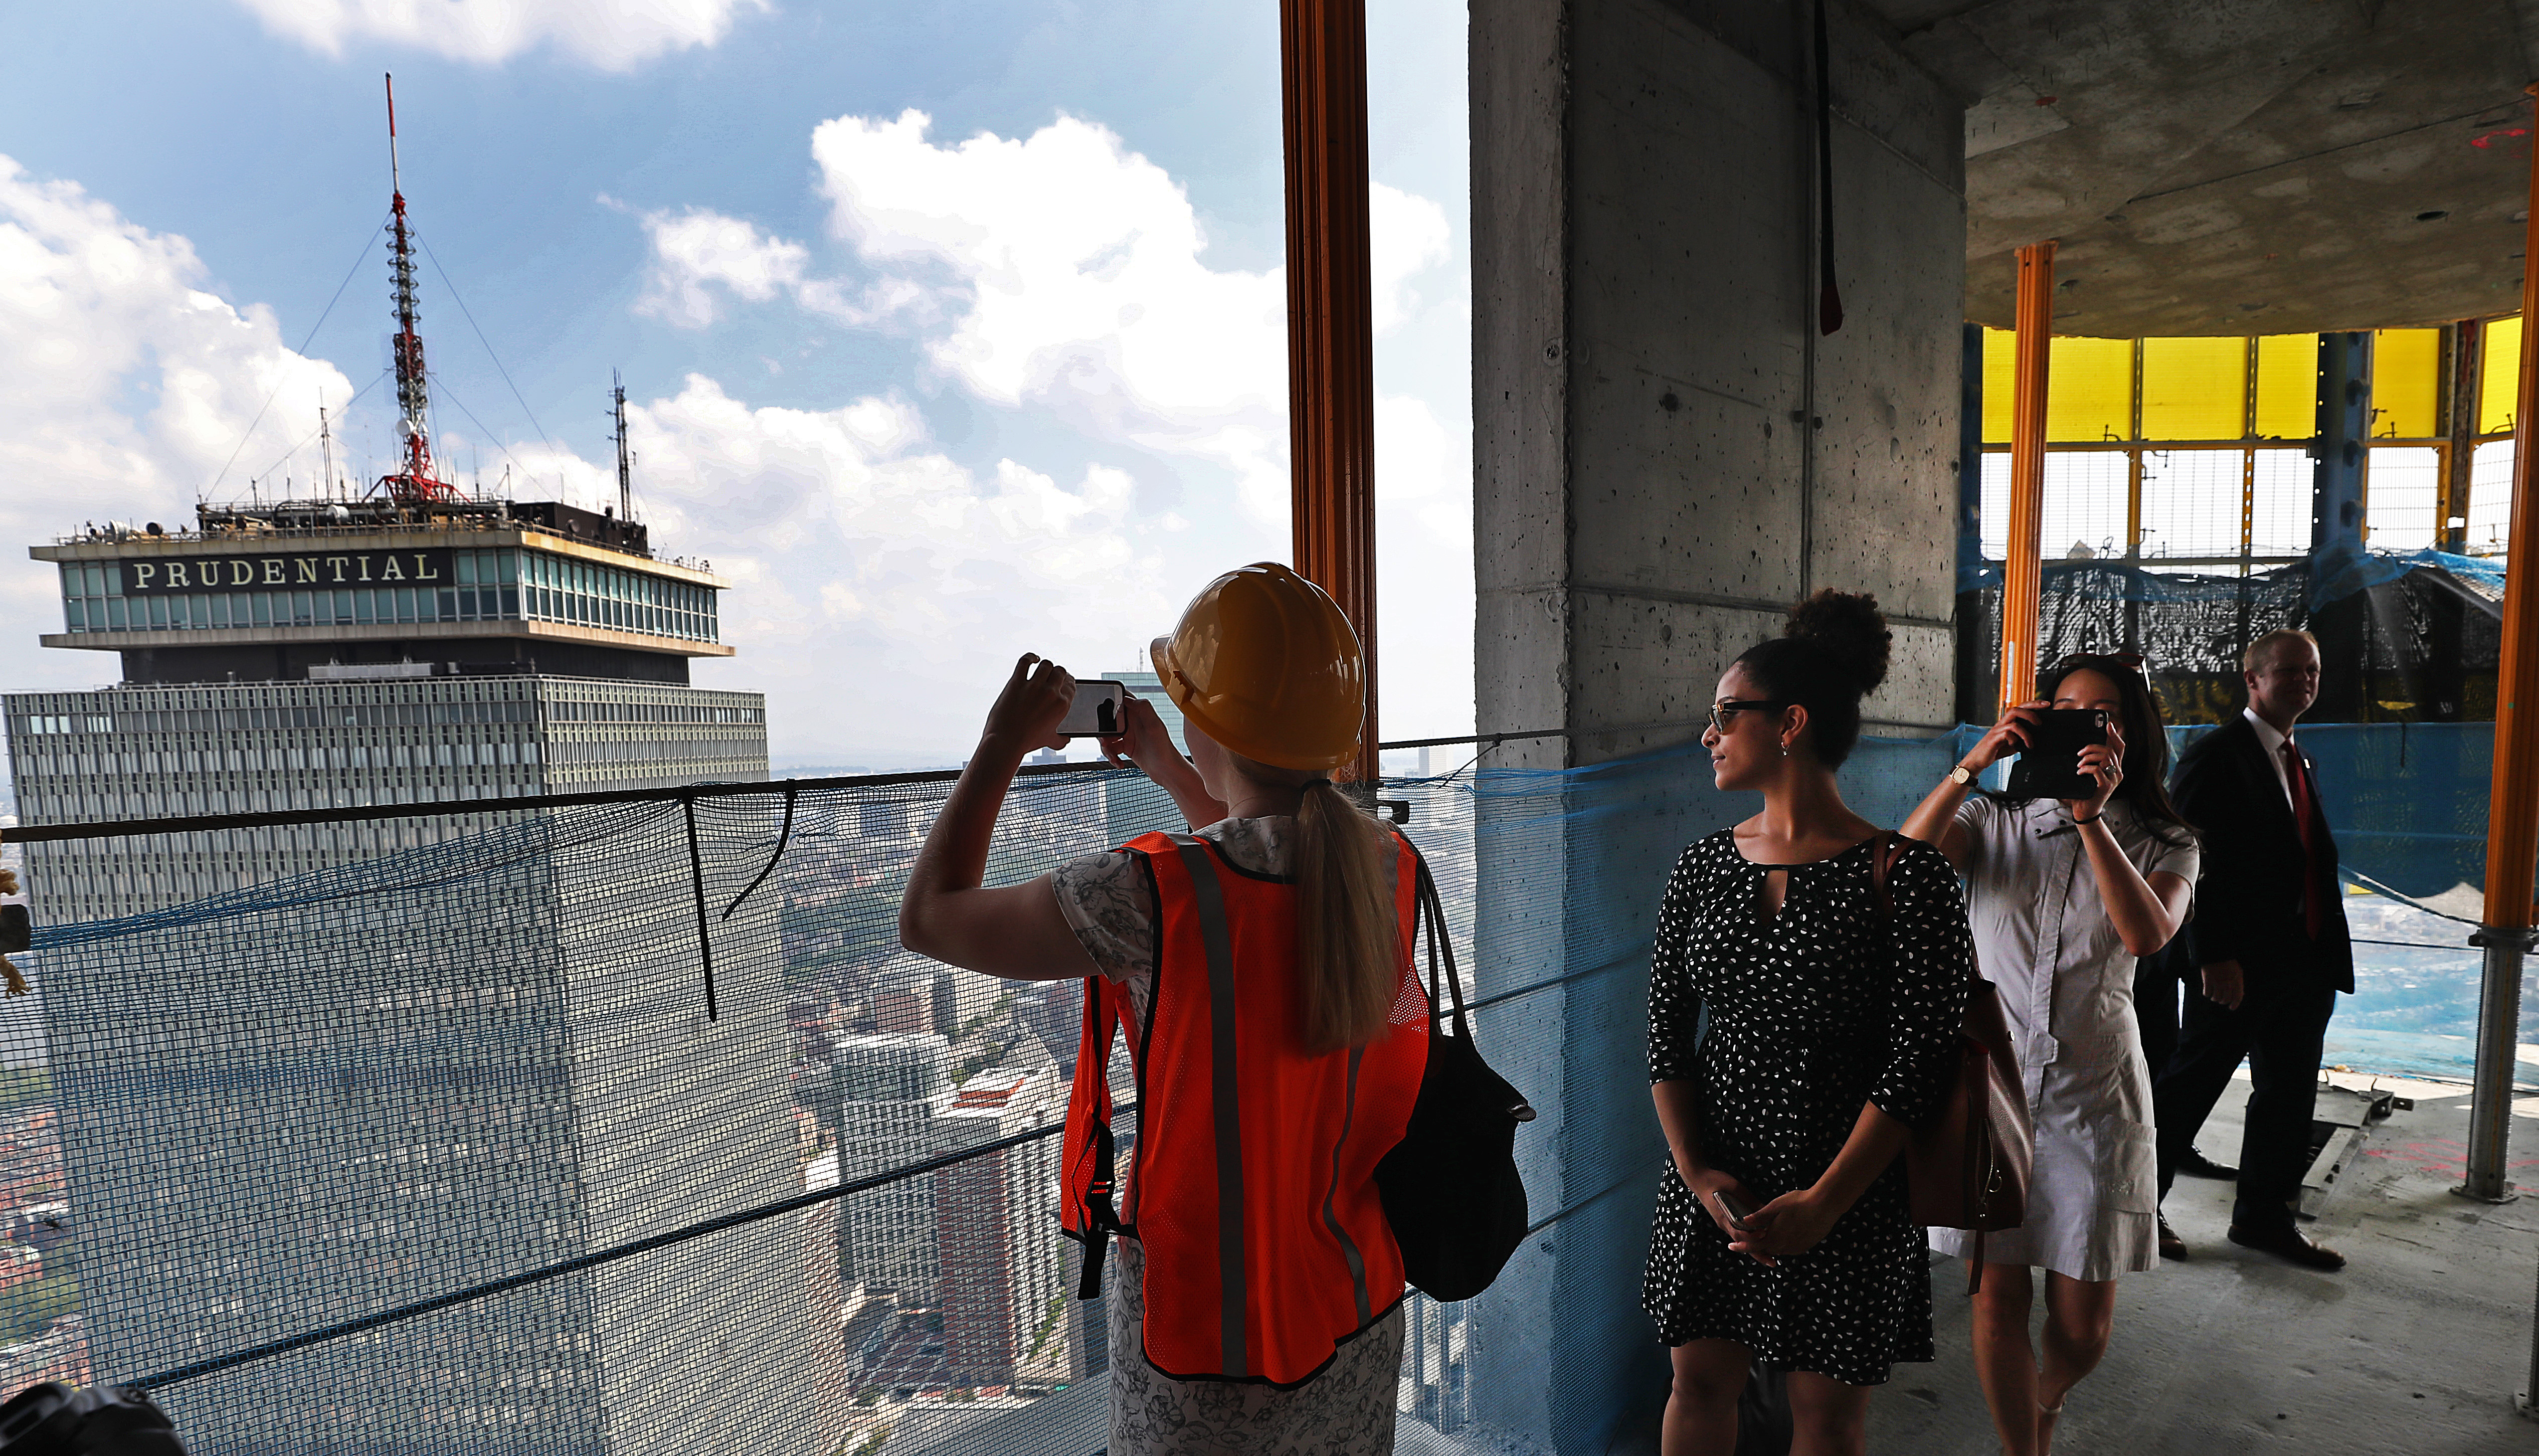 People milling about and snapping photos from an open floor of an under-construction skyscraper.